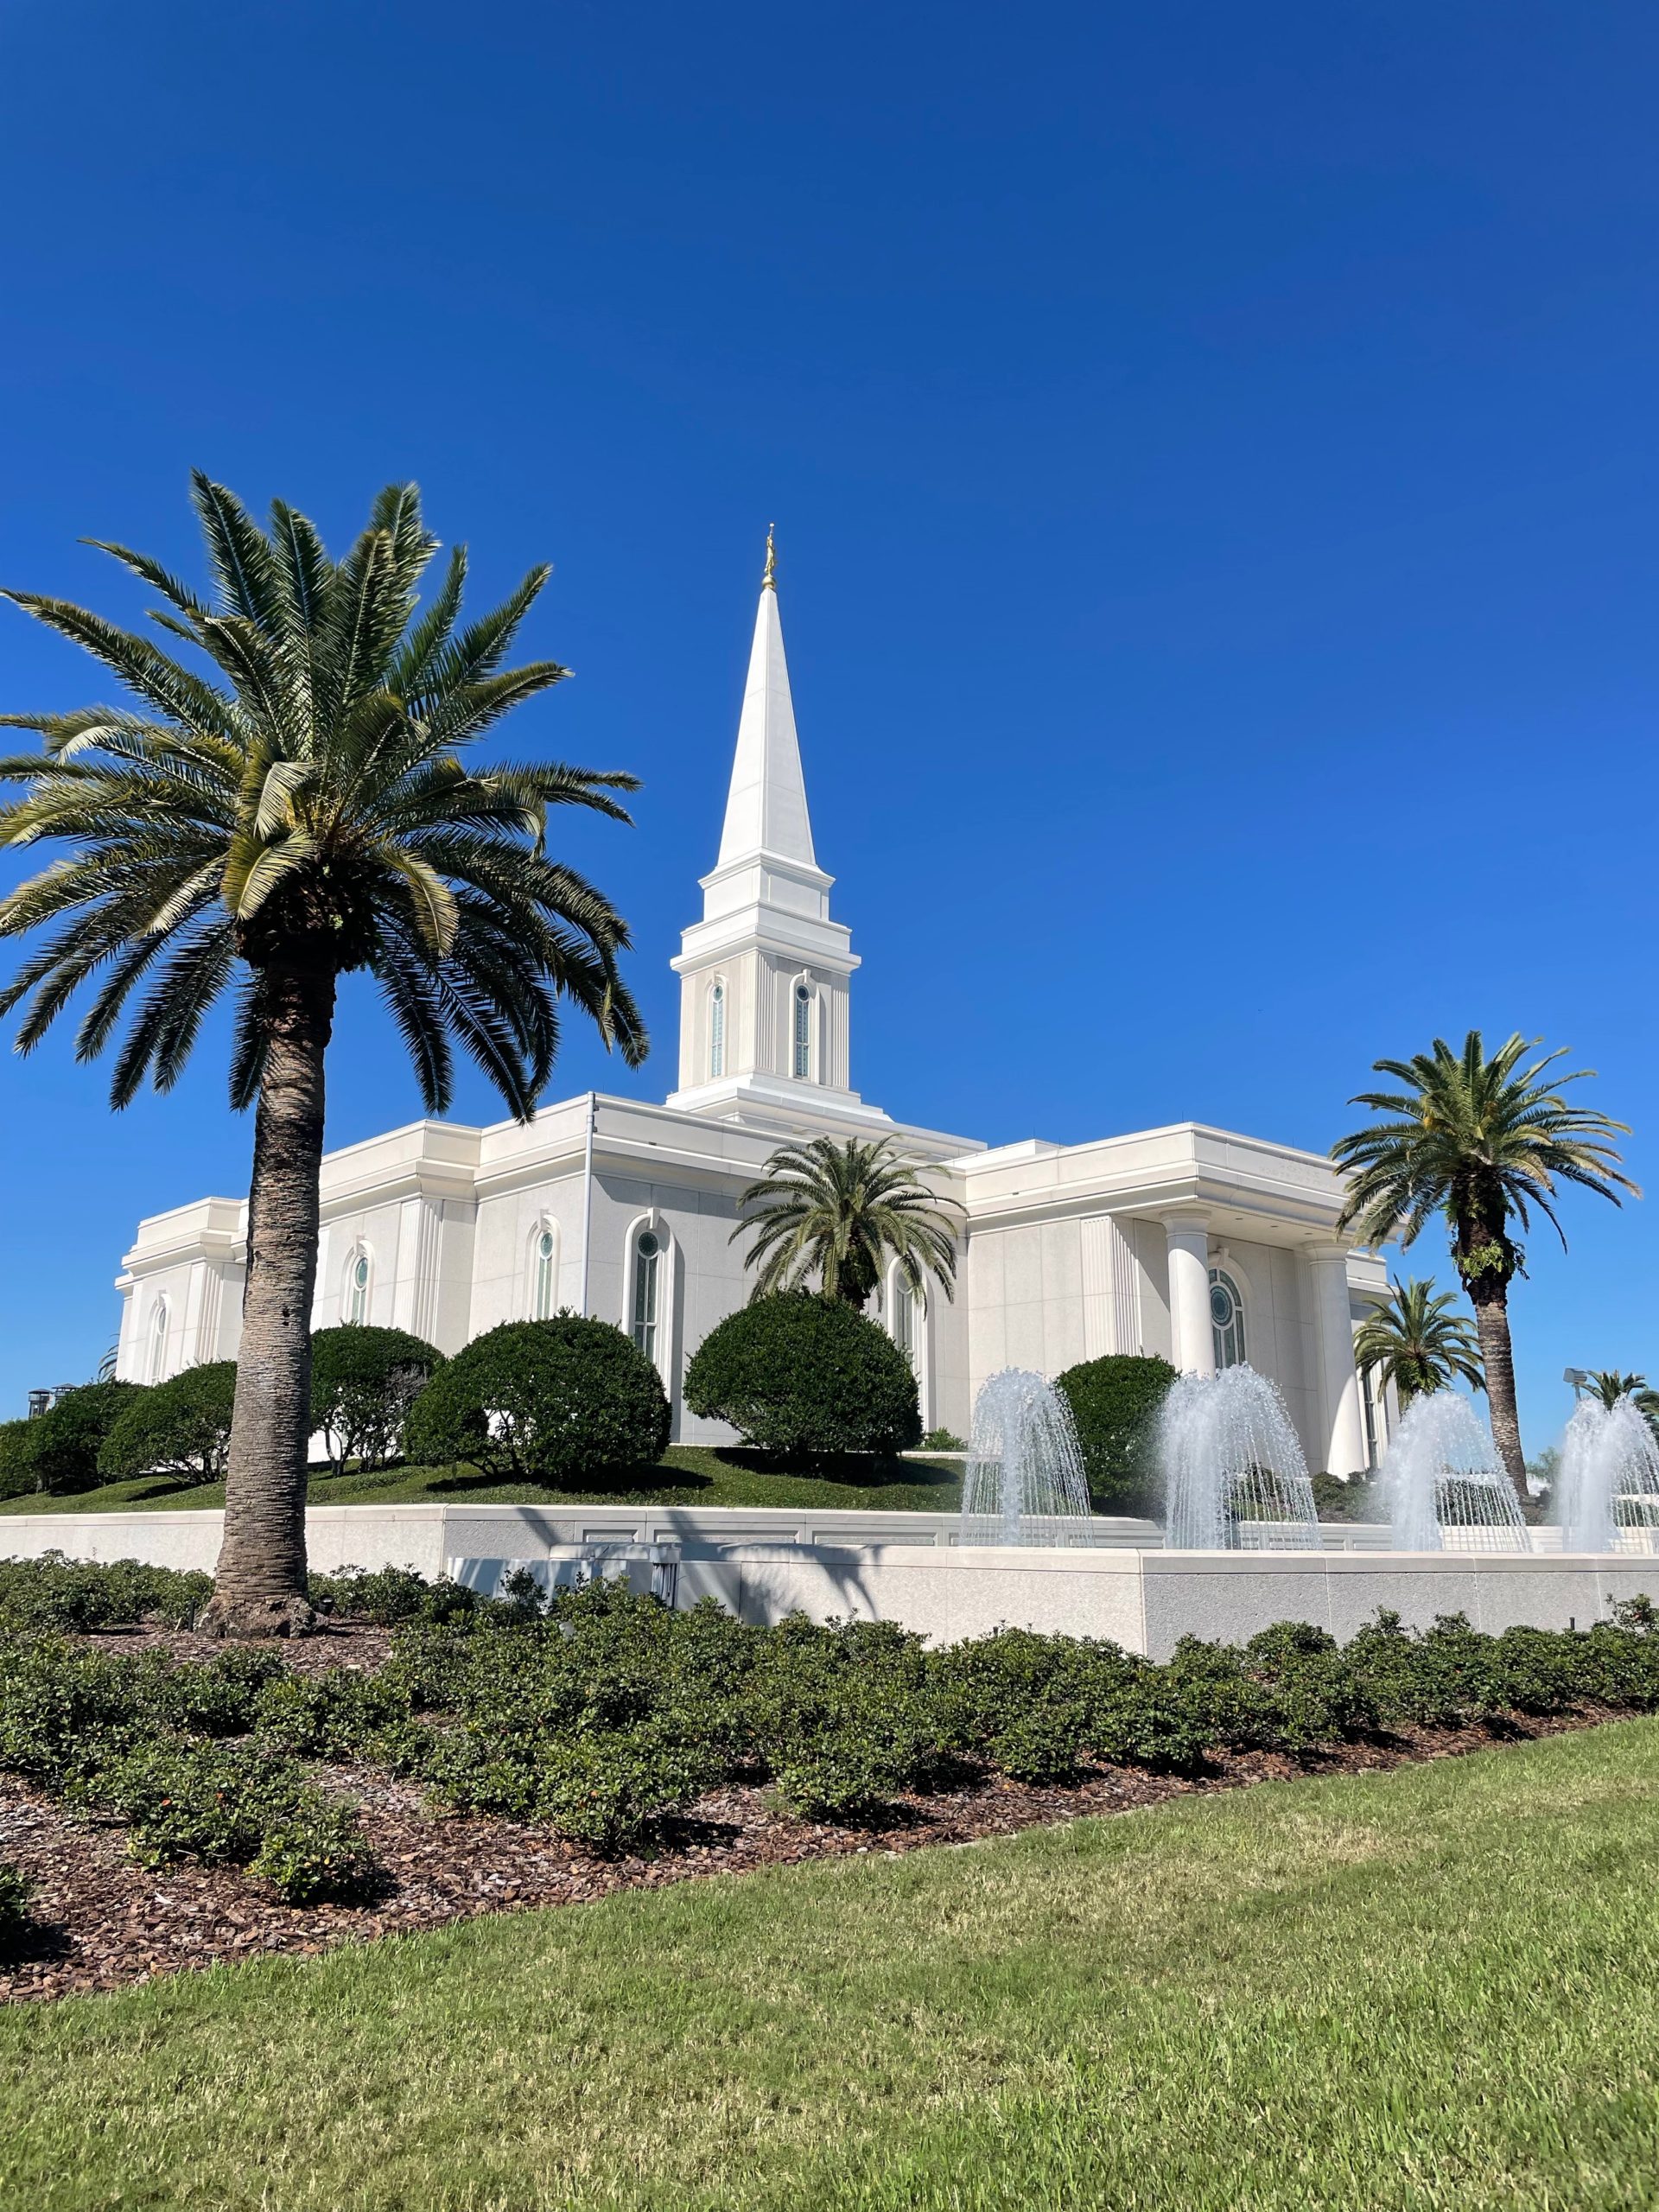 Read more about the article Orlando Florida Temple of the Church of Jesus Christ of Latter-day Saints